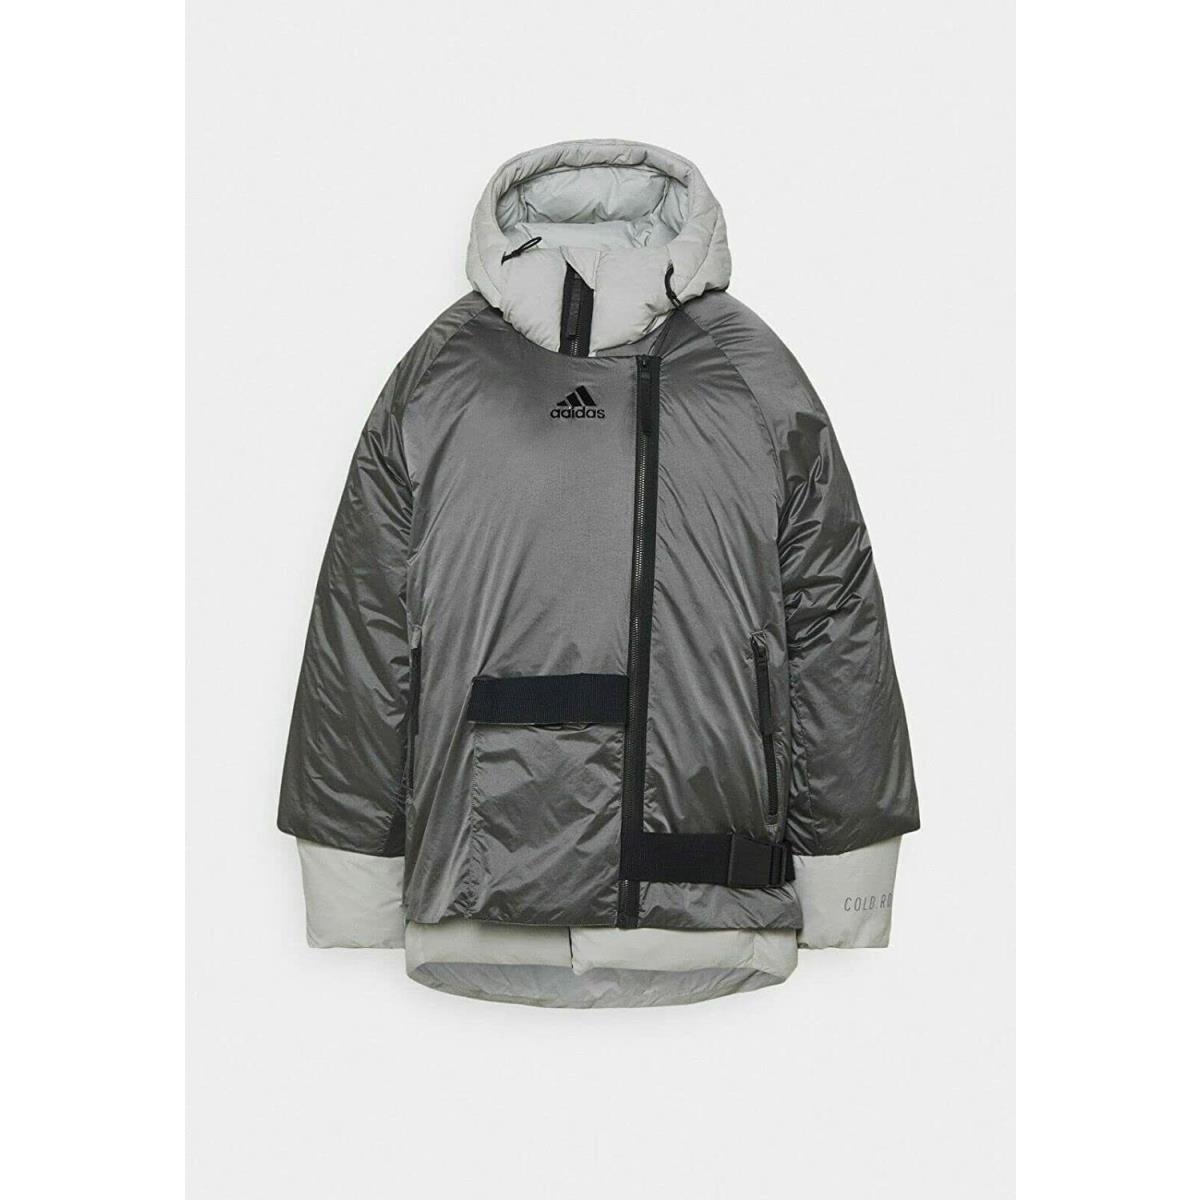 Adidas Womens S or XL Cold.rdy Down Jacket FT2459 Super Warm